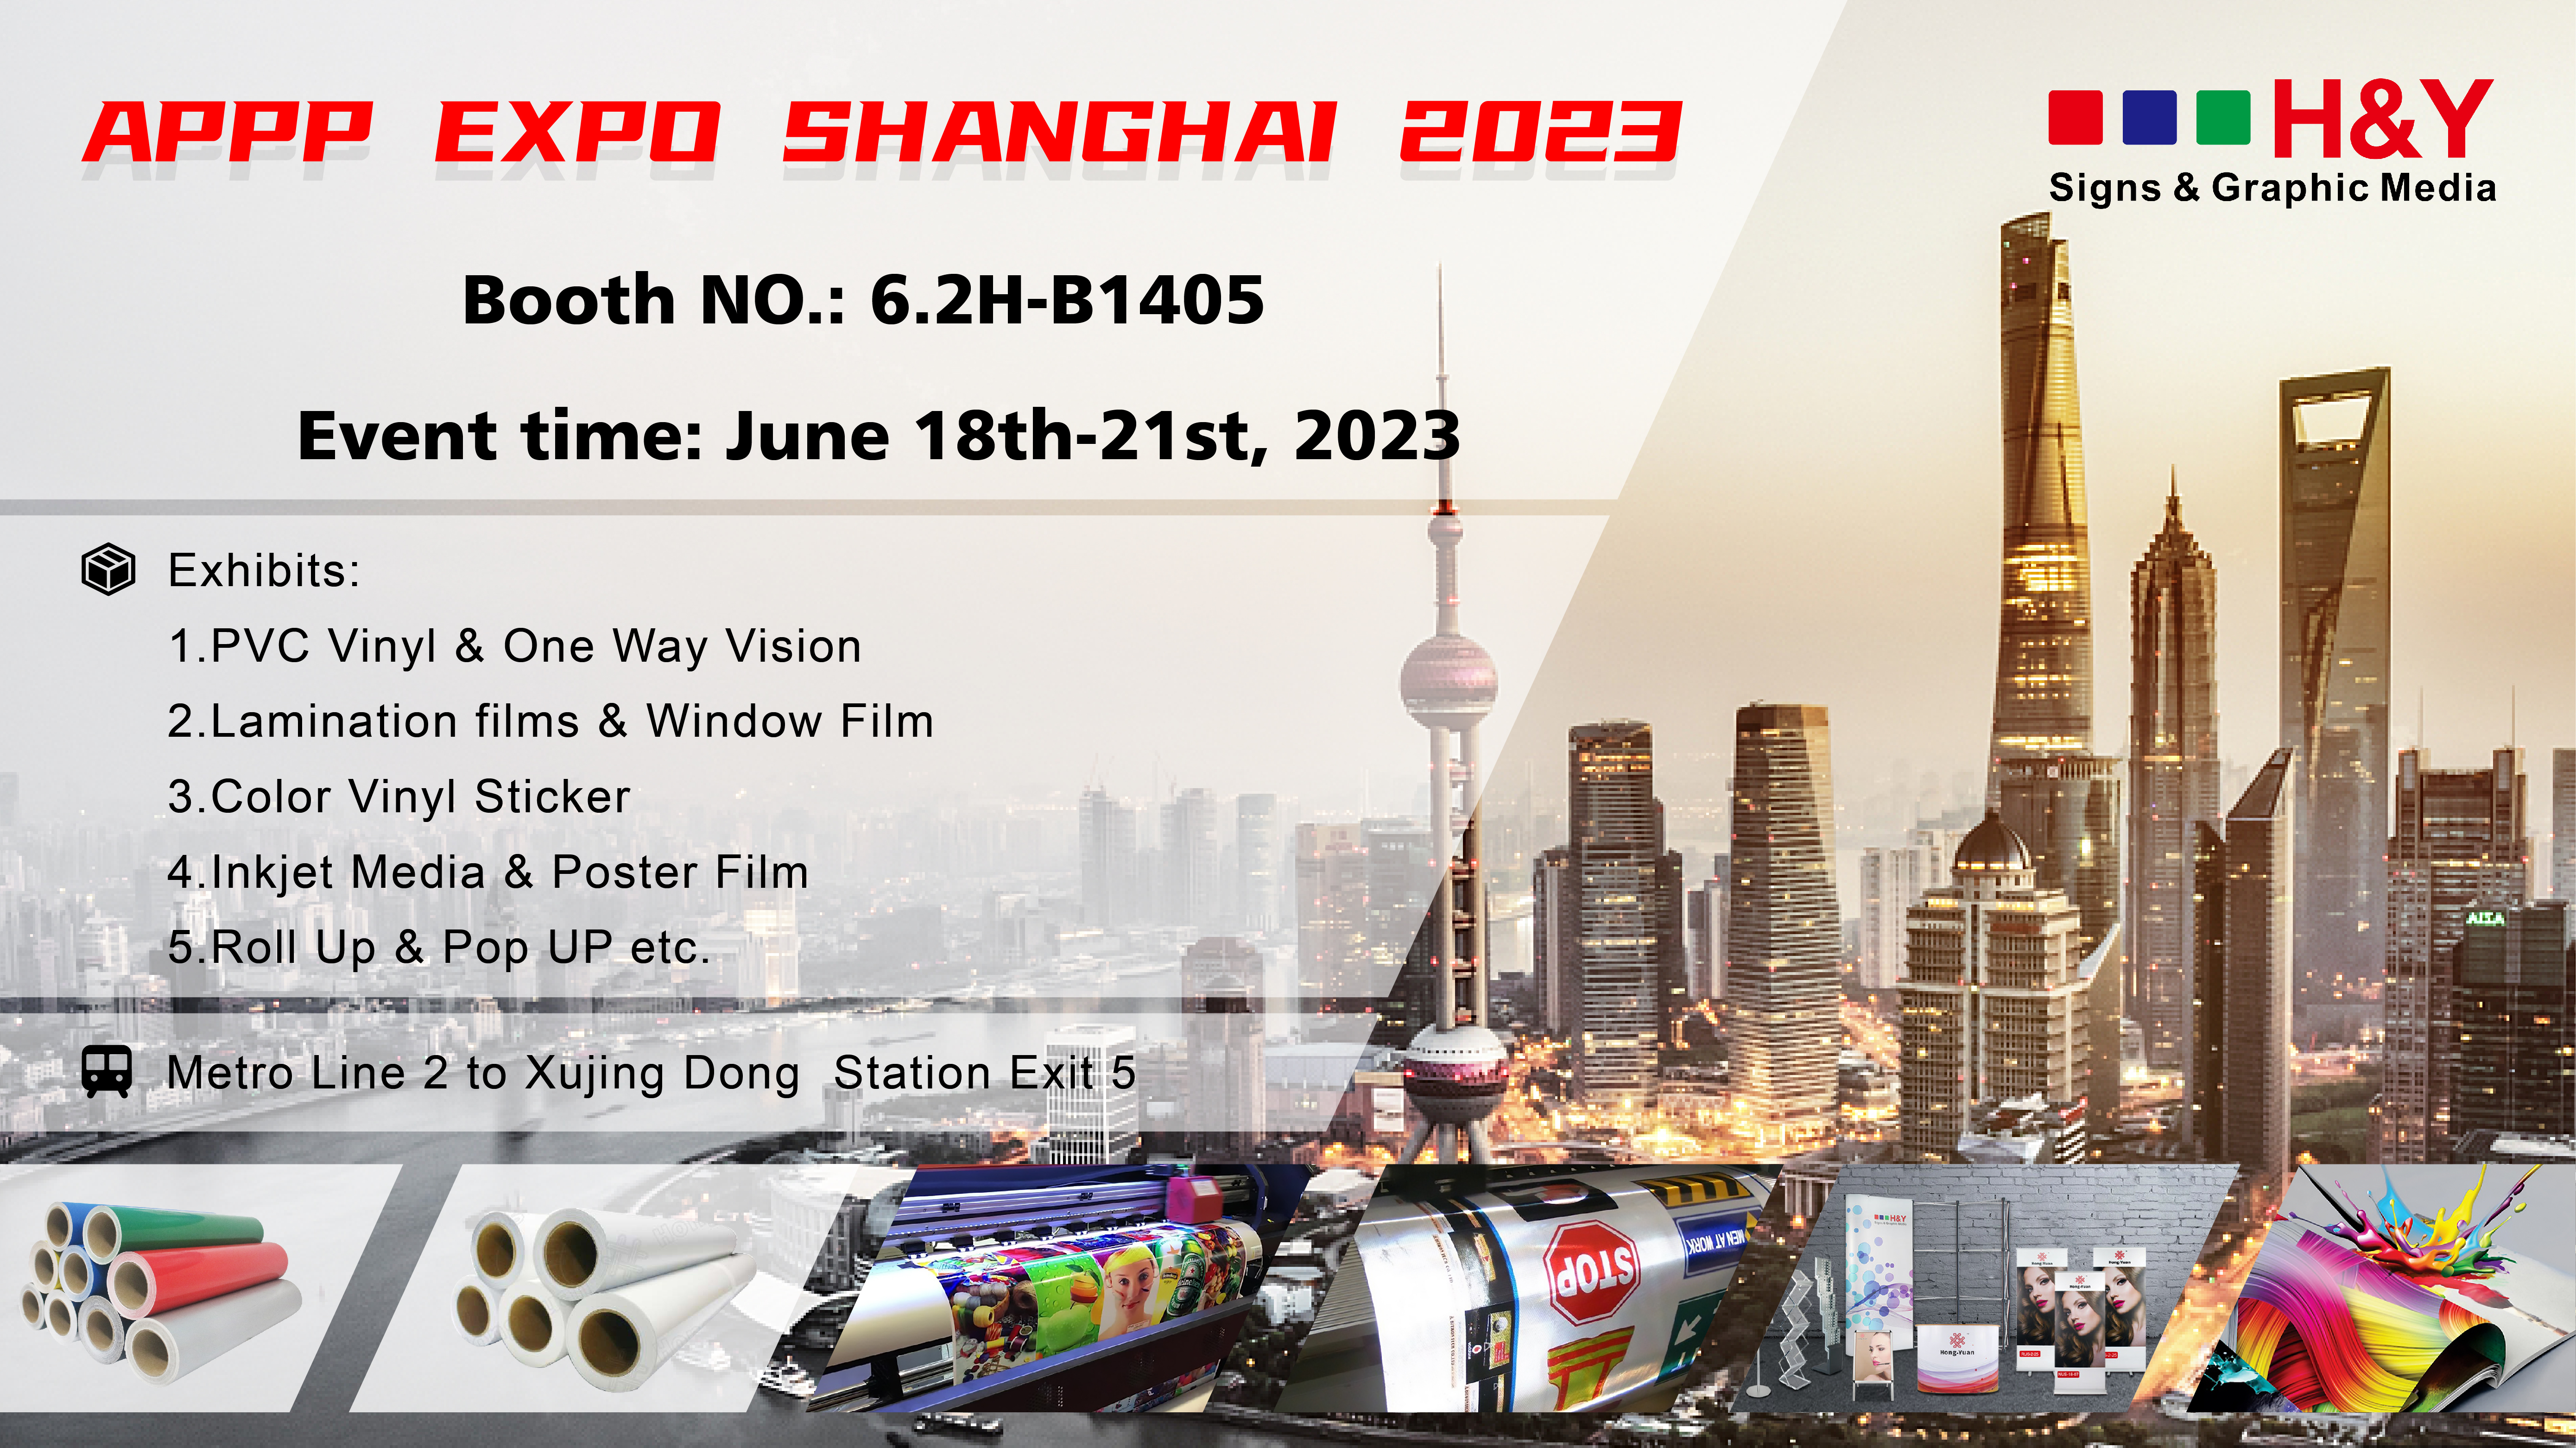 See you on 2023 Shanghai APPP Expo 6.2H B1405